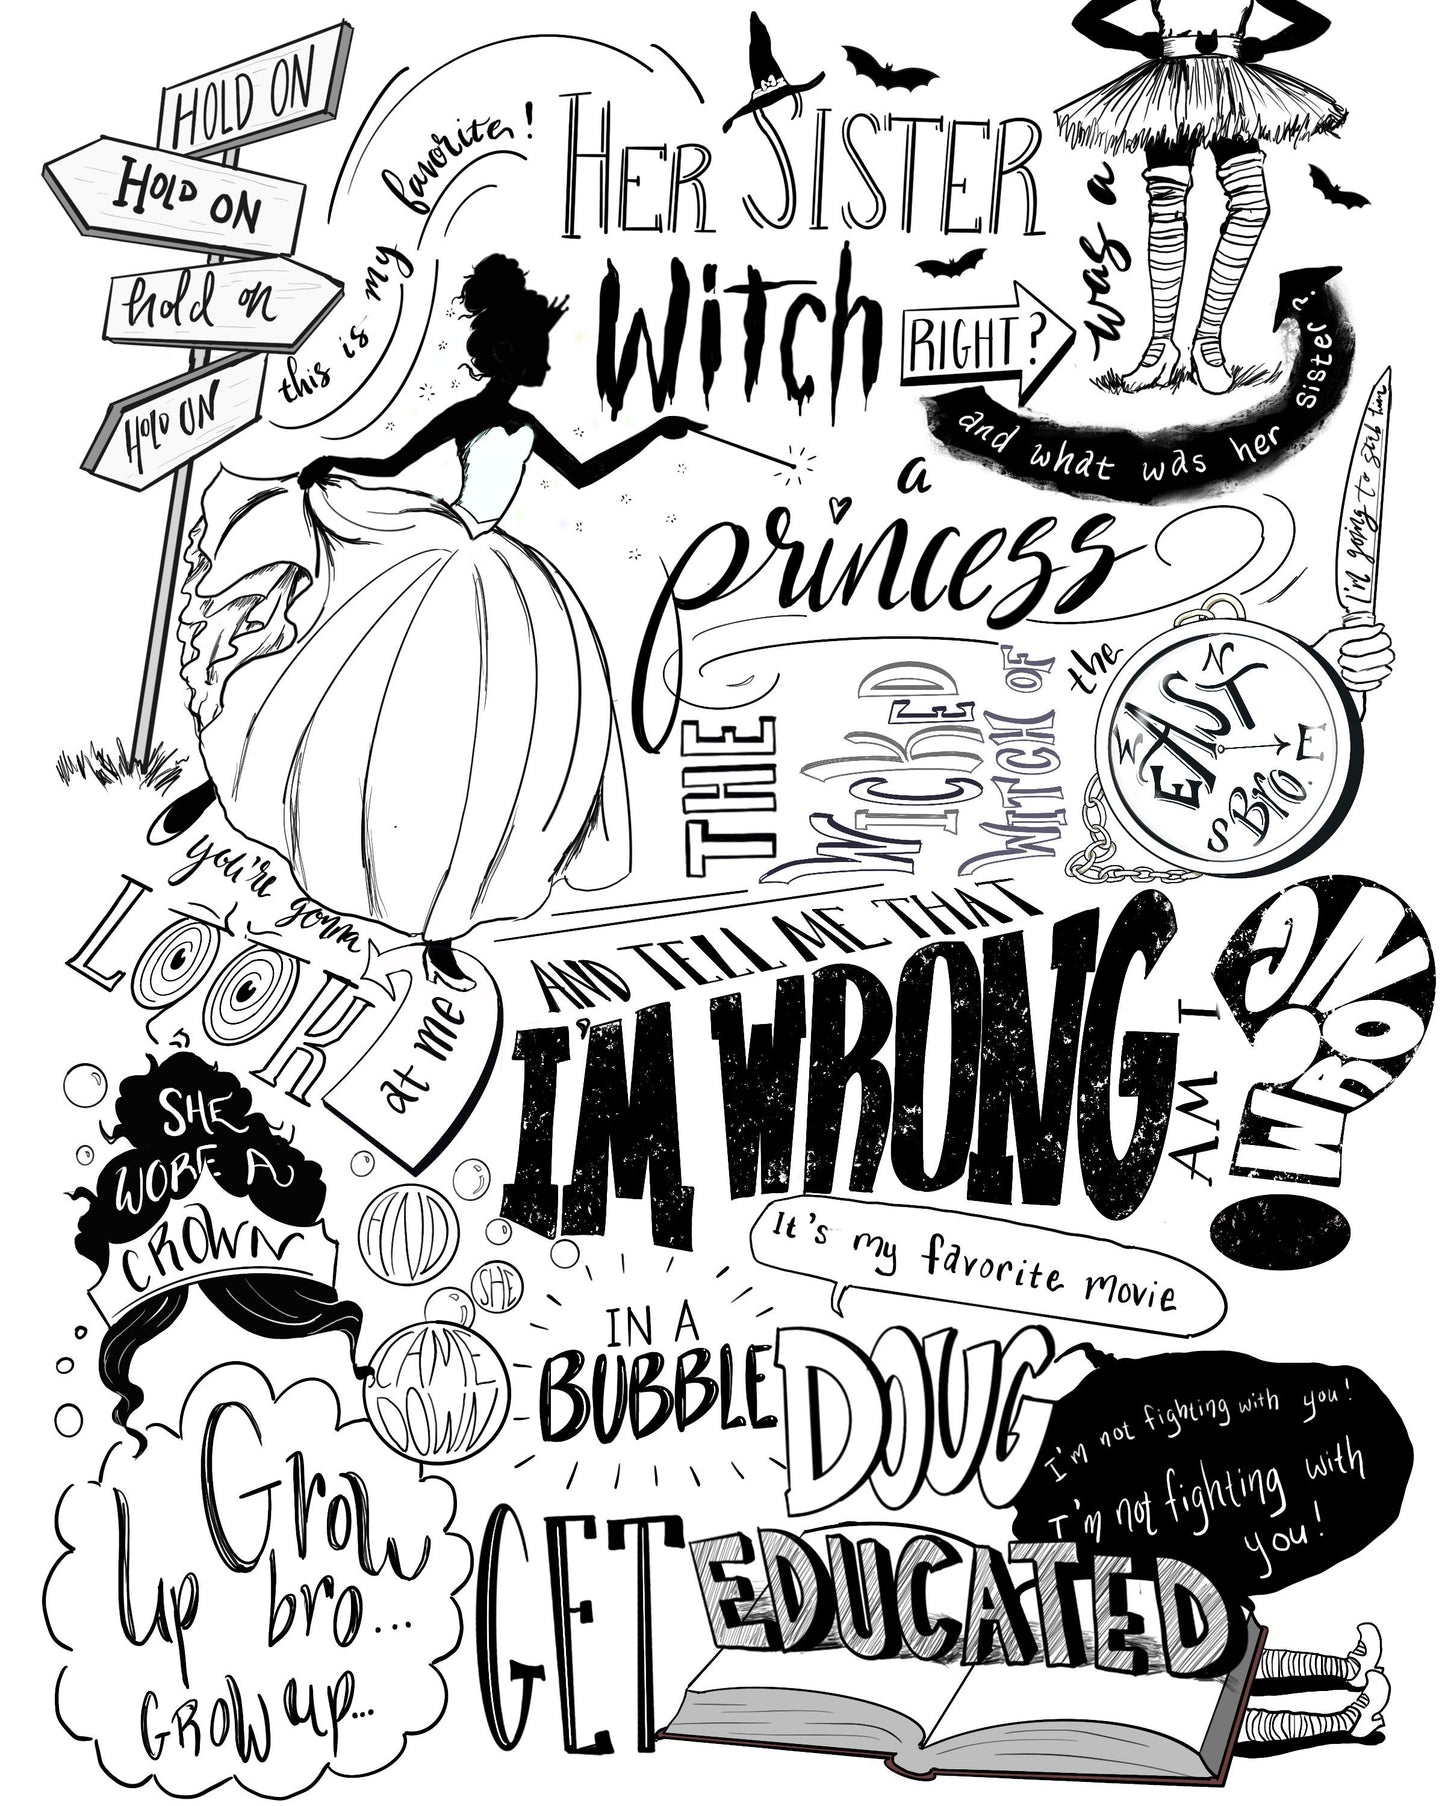 Wicked Witch of the East Bro- Coloring page- instant download digital printable artwork- funny gift- hand written